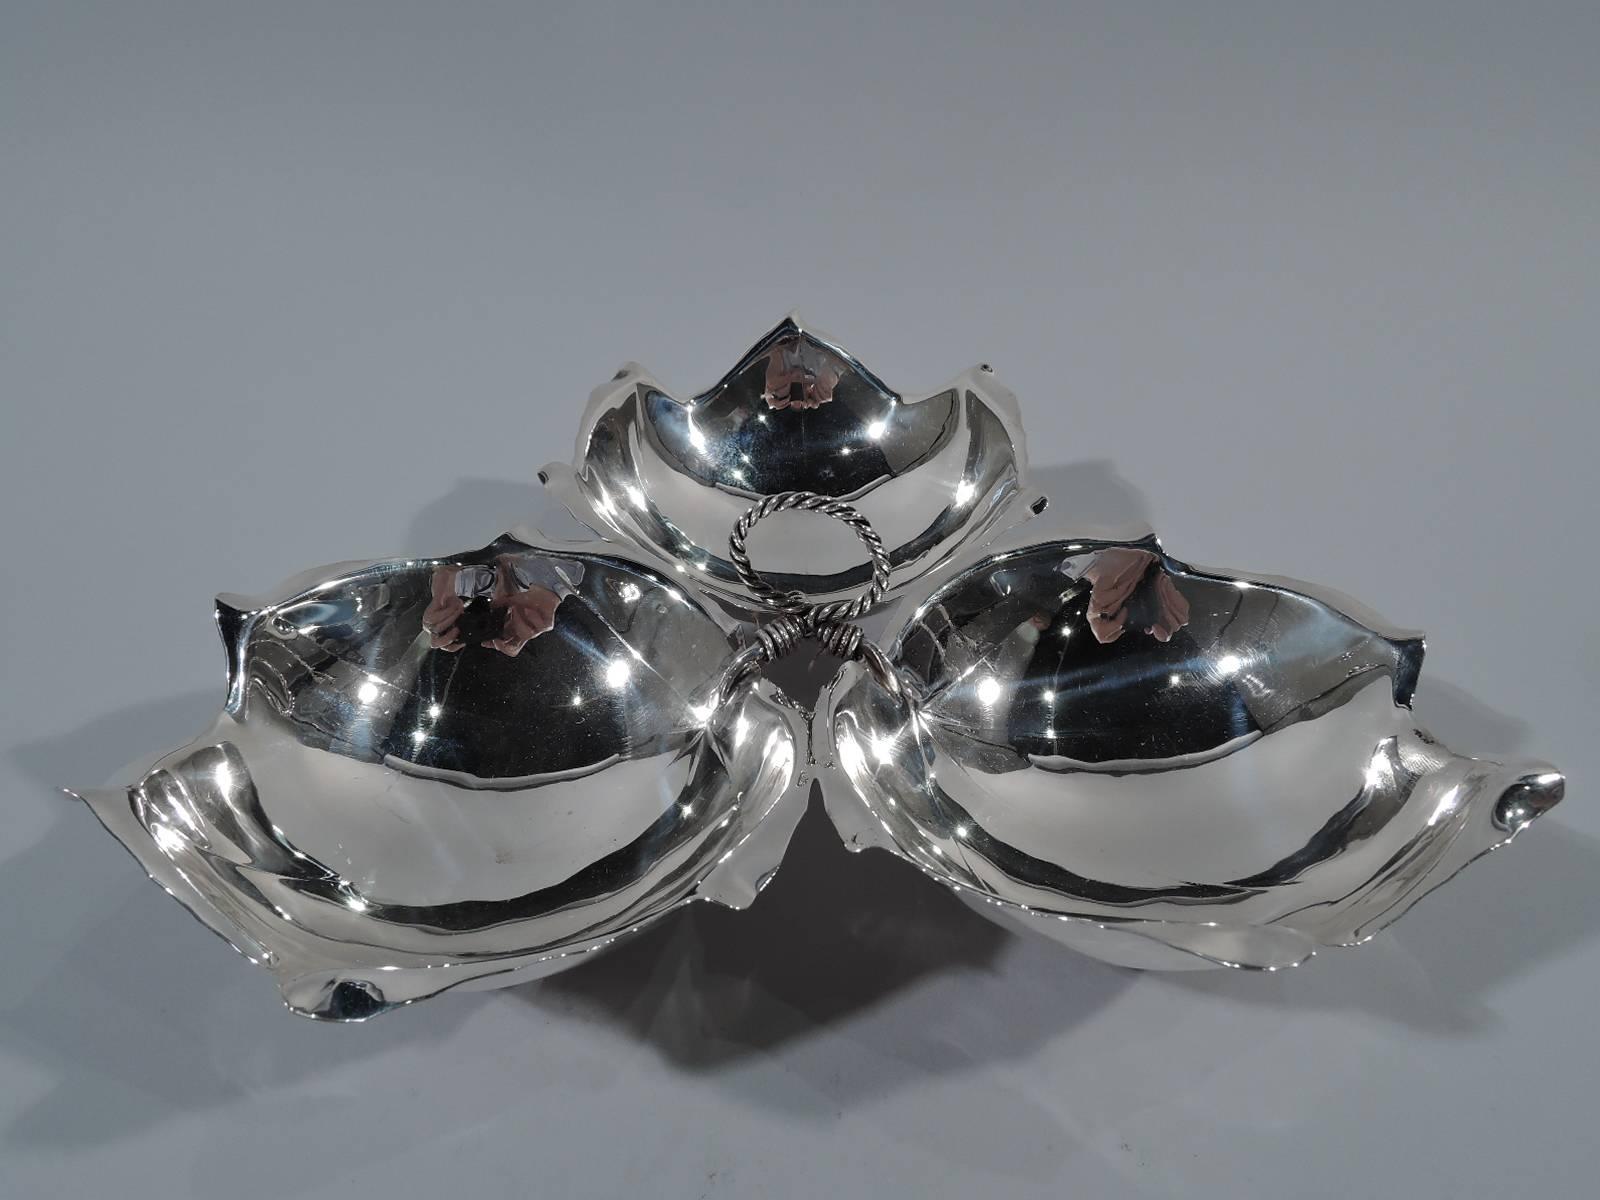 Mid-Century Modern sterling silver condiment server. Made by Alfredo Sciarrotta in Newport, Rhode Island for Black, Starr & Gorham in New York. Three leaf-form bowls tied together with wire. Rests on three ball supports. A playful but practical